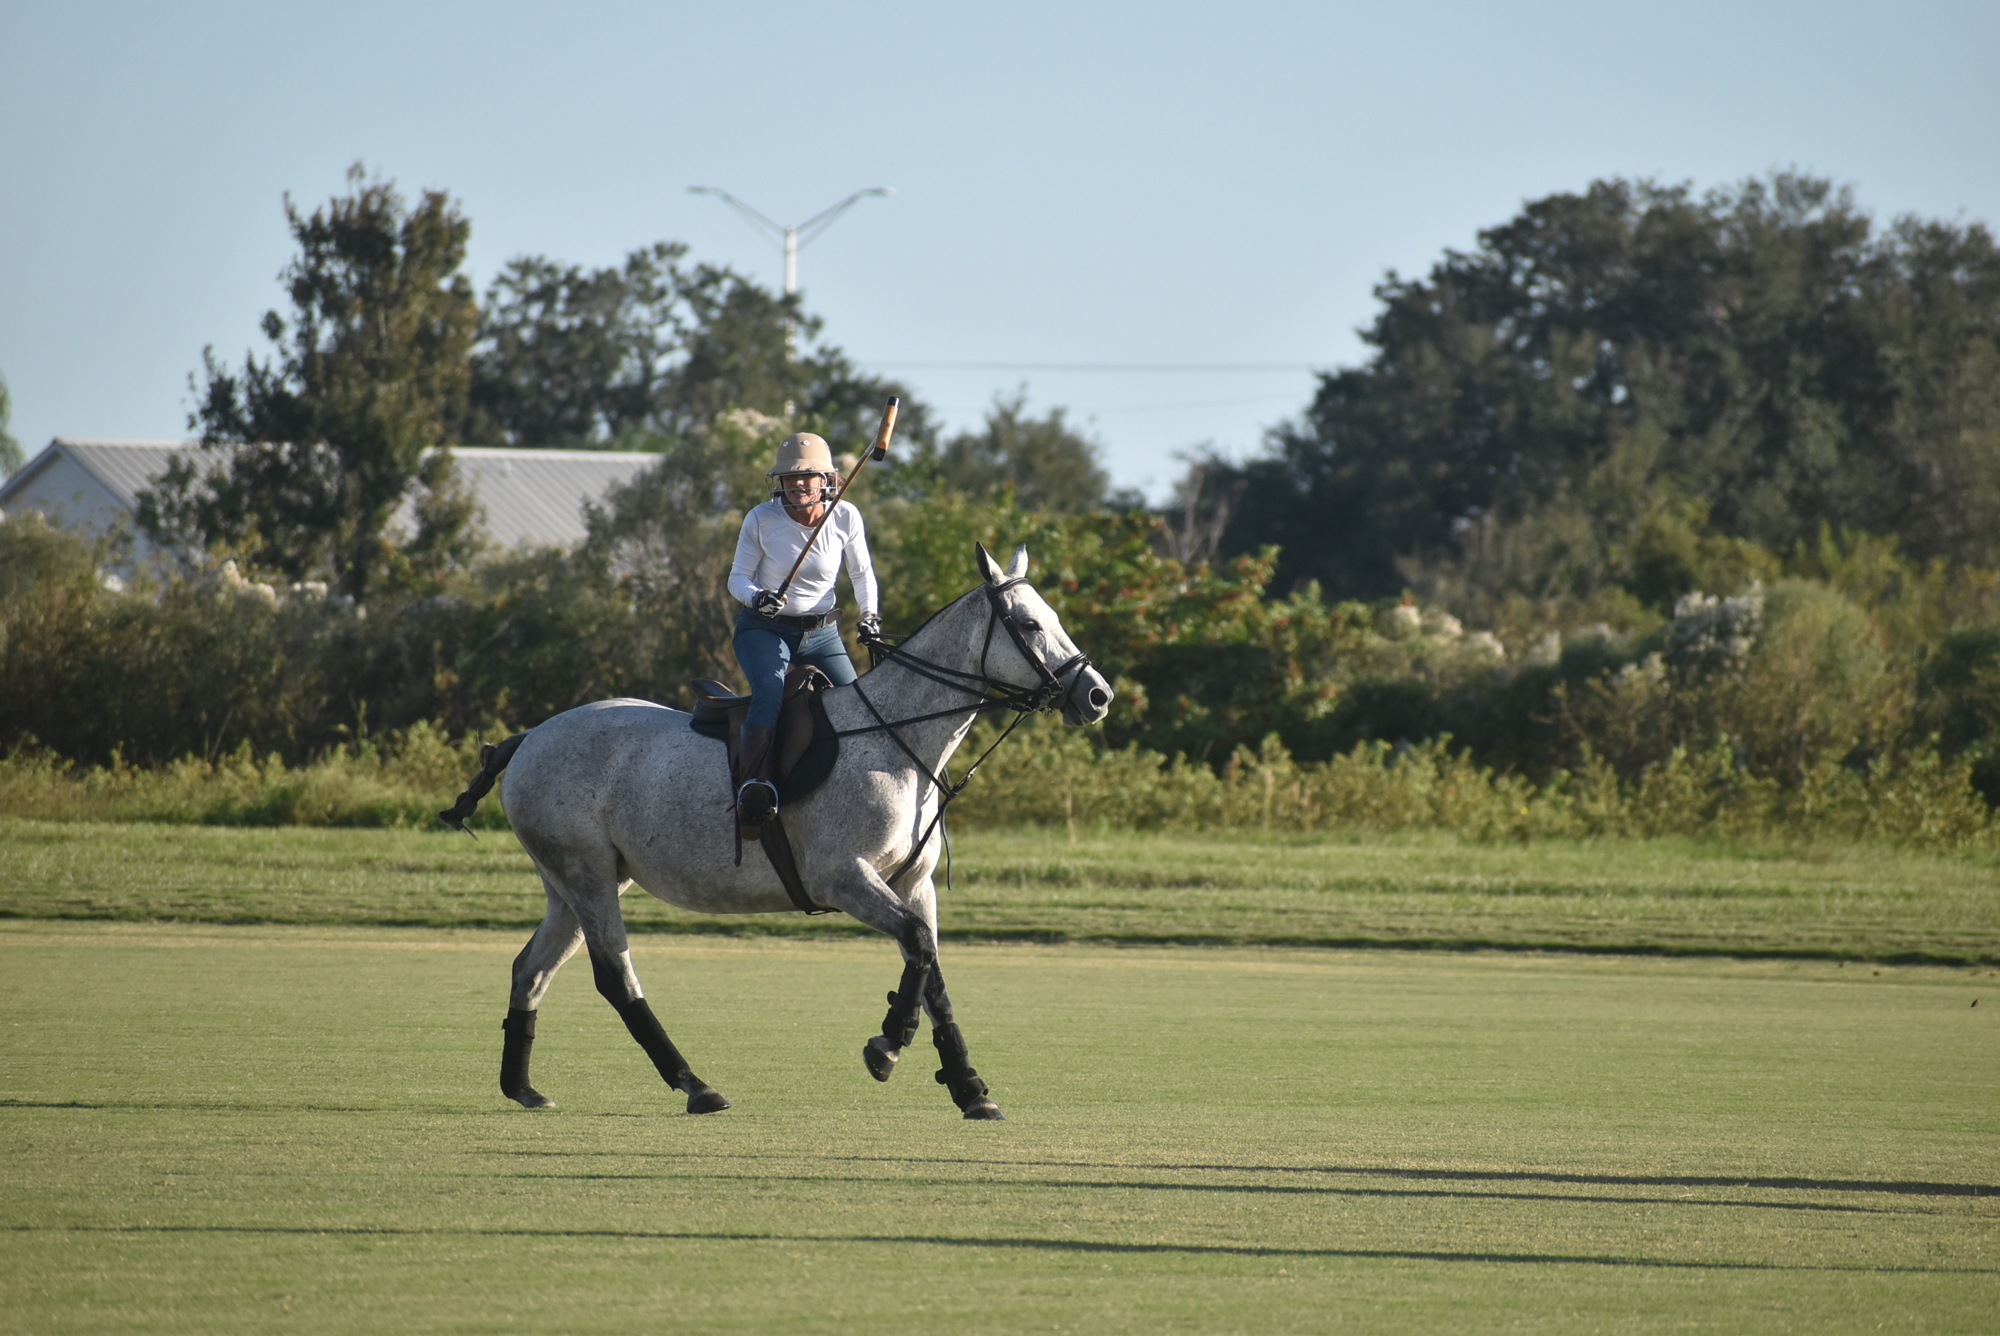 Jaymie Klauber plays polo on 7-year-old Chloe. It was the first practice and scrimmage of the new season.